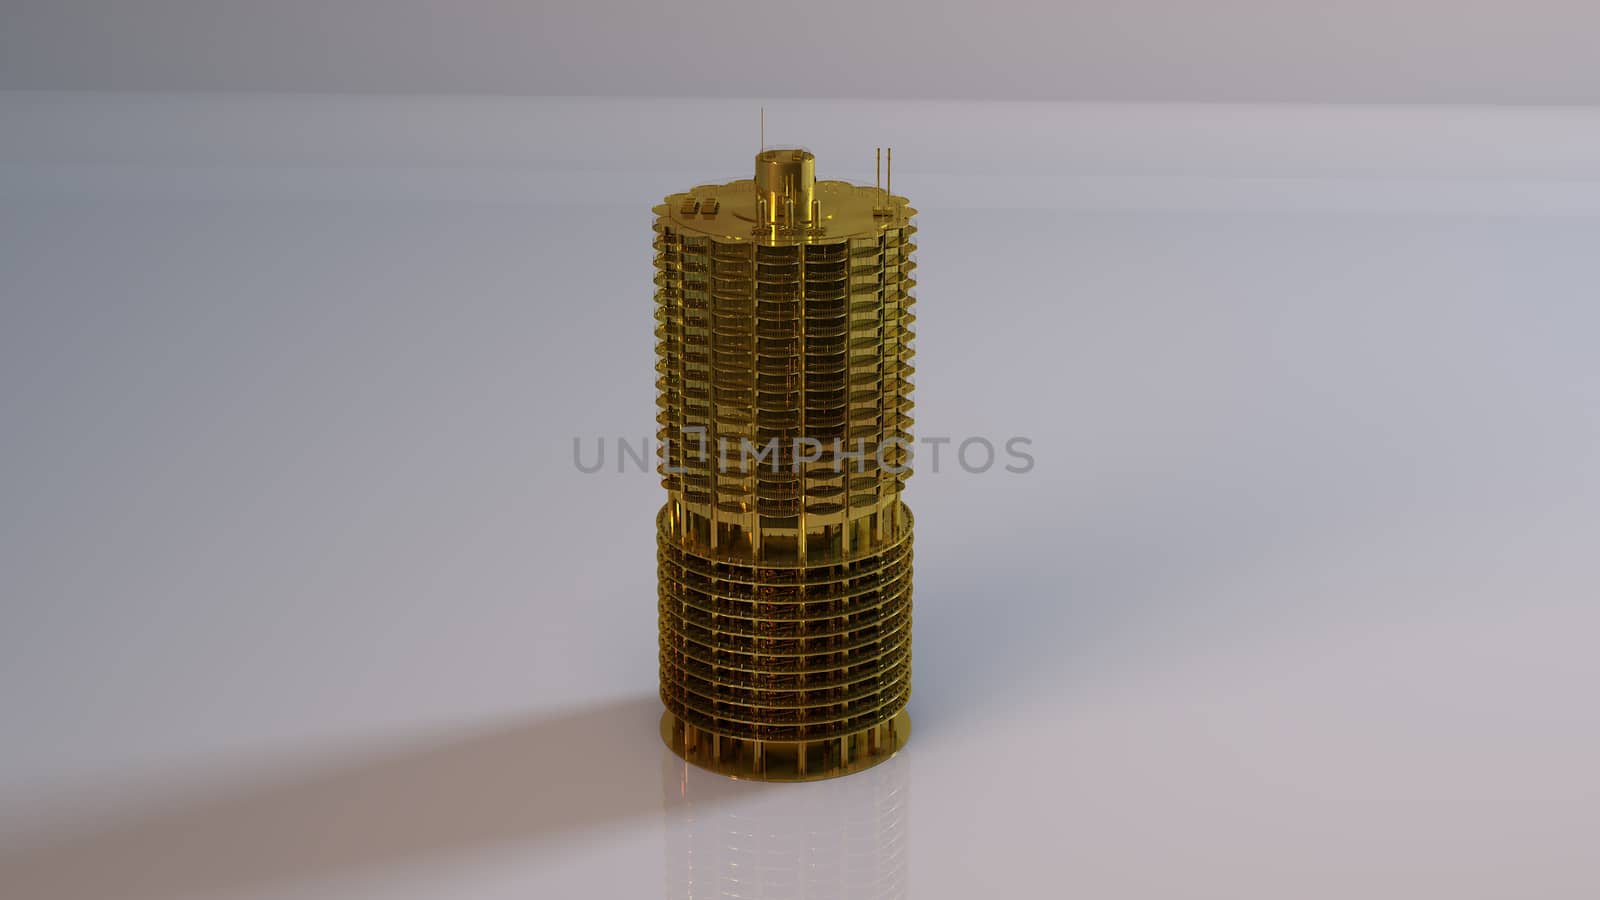 Golden 3D object (detailed tower) inside a white reflected stage with high render quality to be used as a logo, medal, symbol, shape, emblem, icon, business, geometric, label or any other use